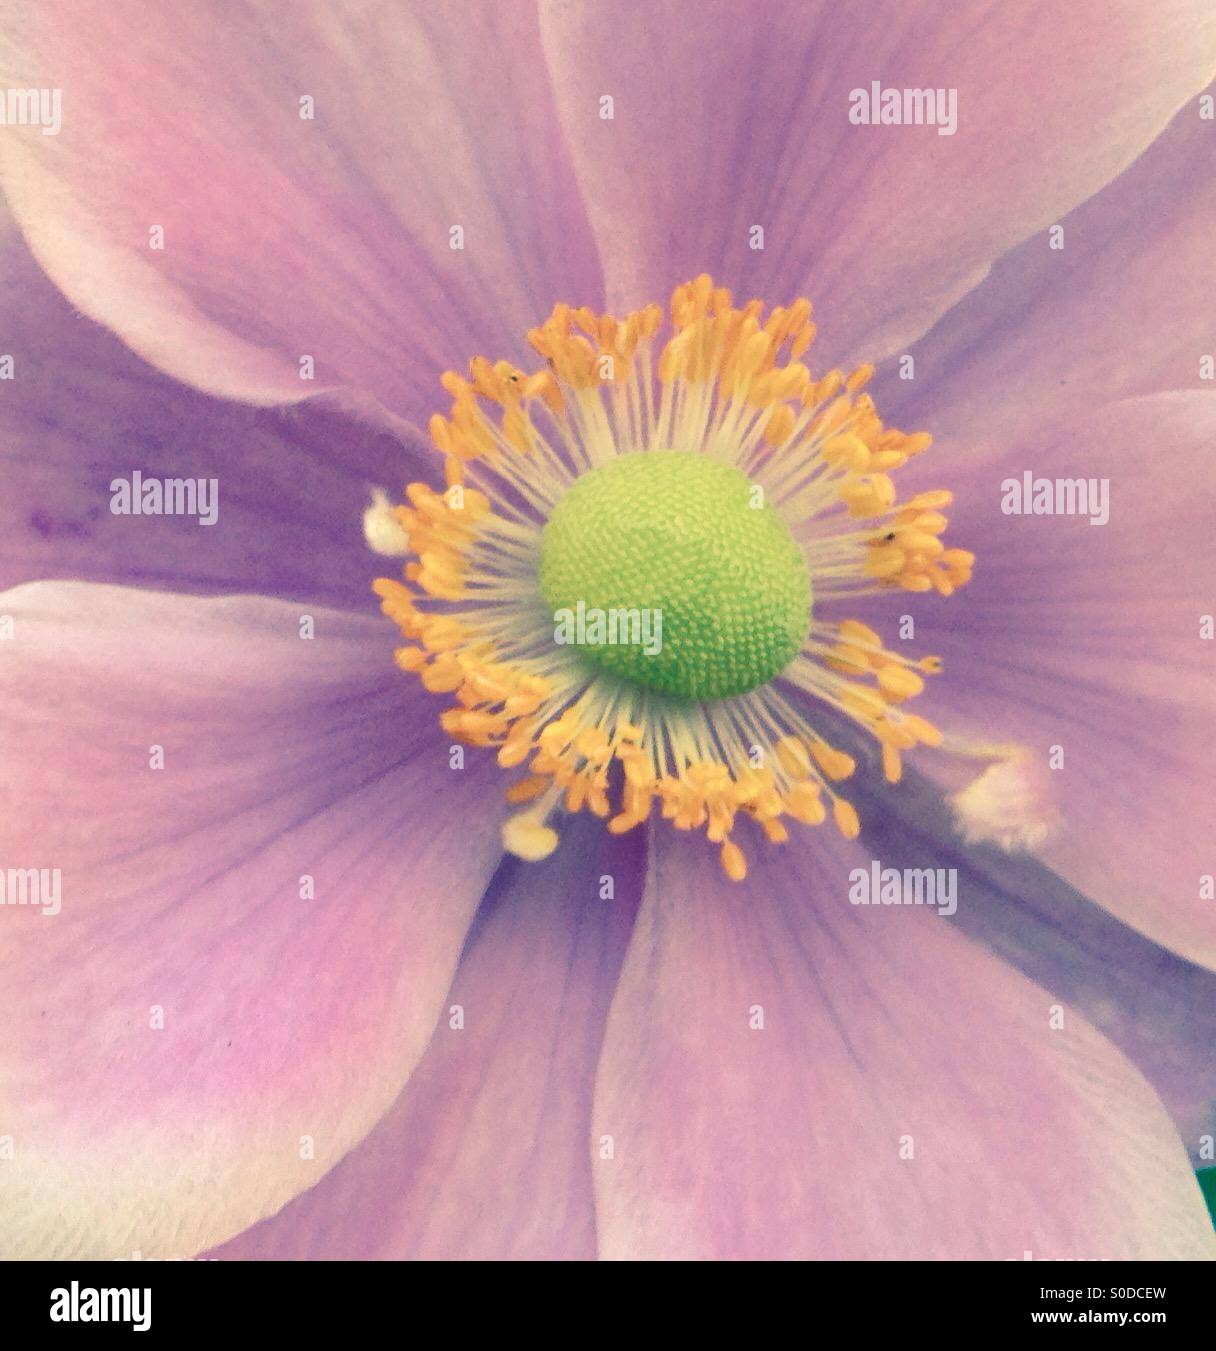 Close up pink Anemone flower with yellow stamen with old style filter Stock Photo